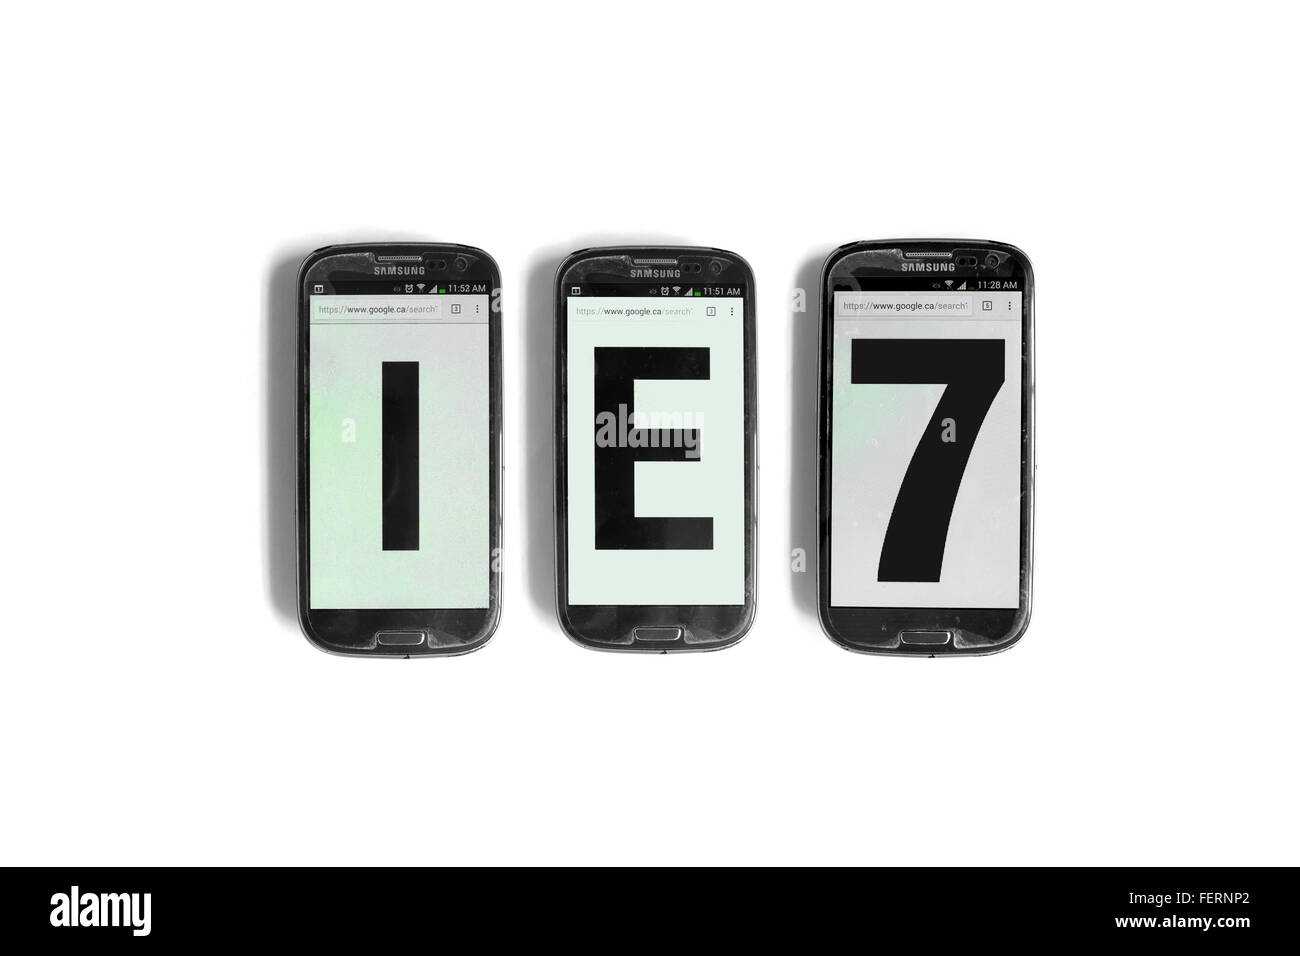 IE7 on the screens of smartphones photographed against a  white background. Stock Photo